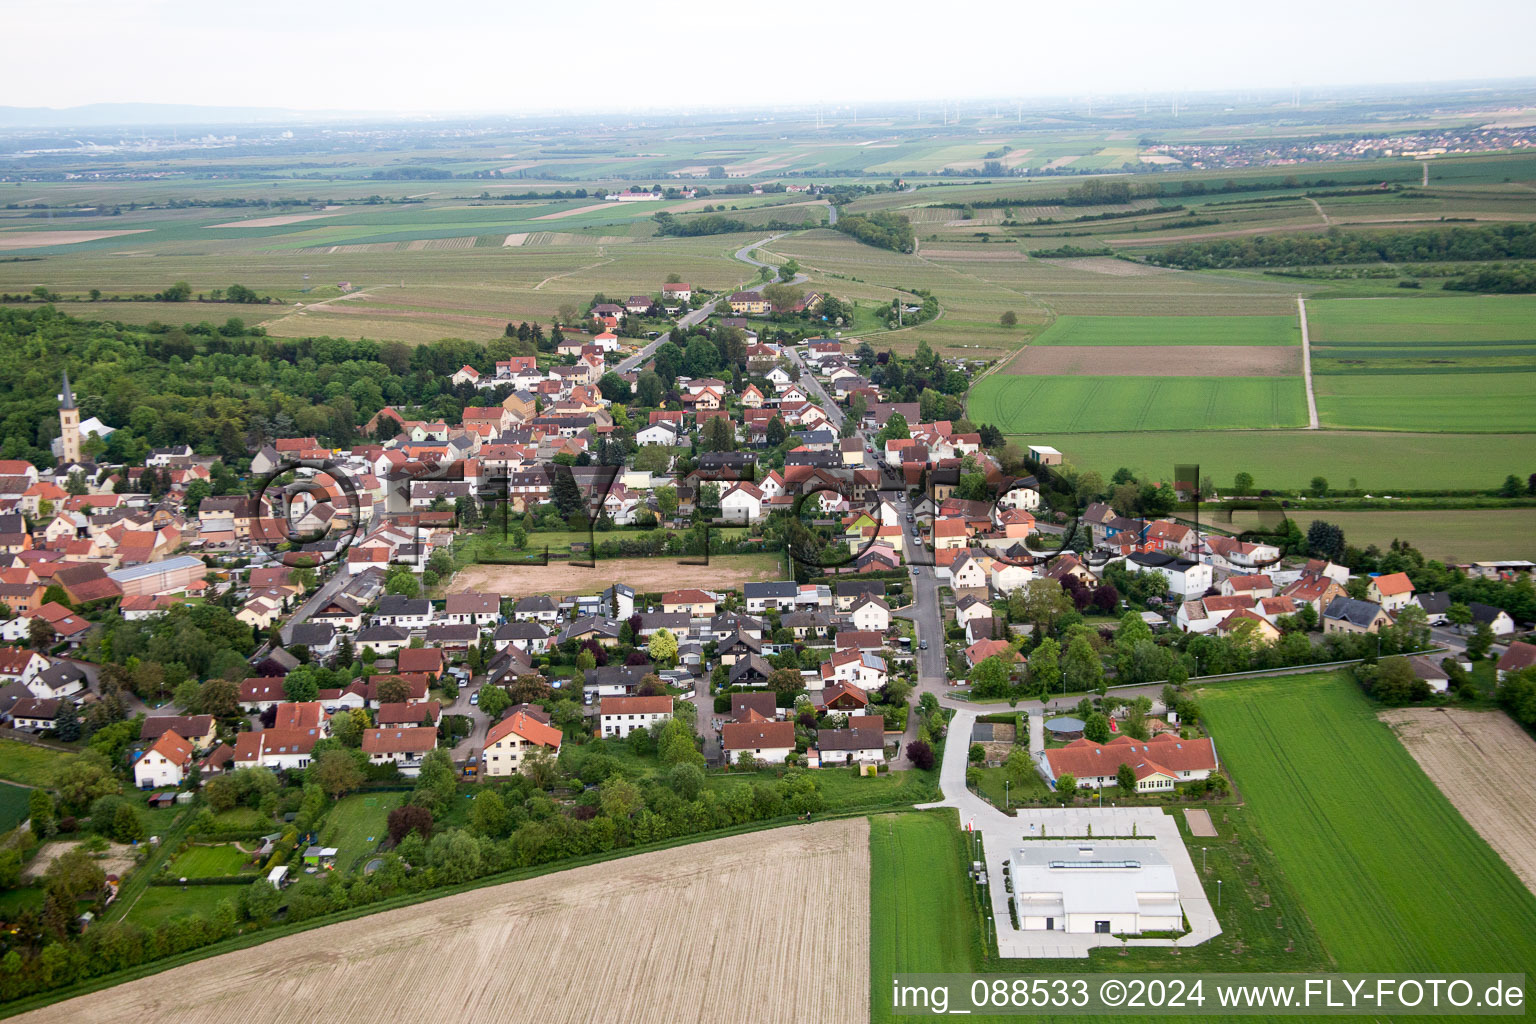 Dittelsheim-Heßloch in the state Rhineland-Palatinate, Germany from above